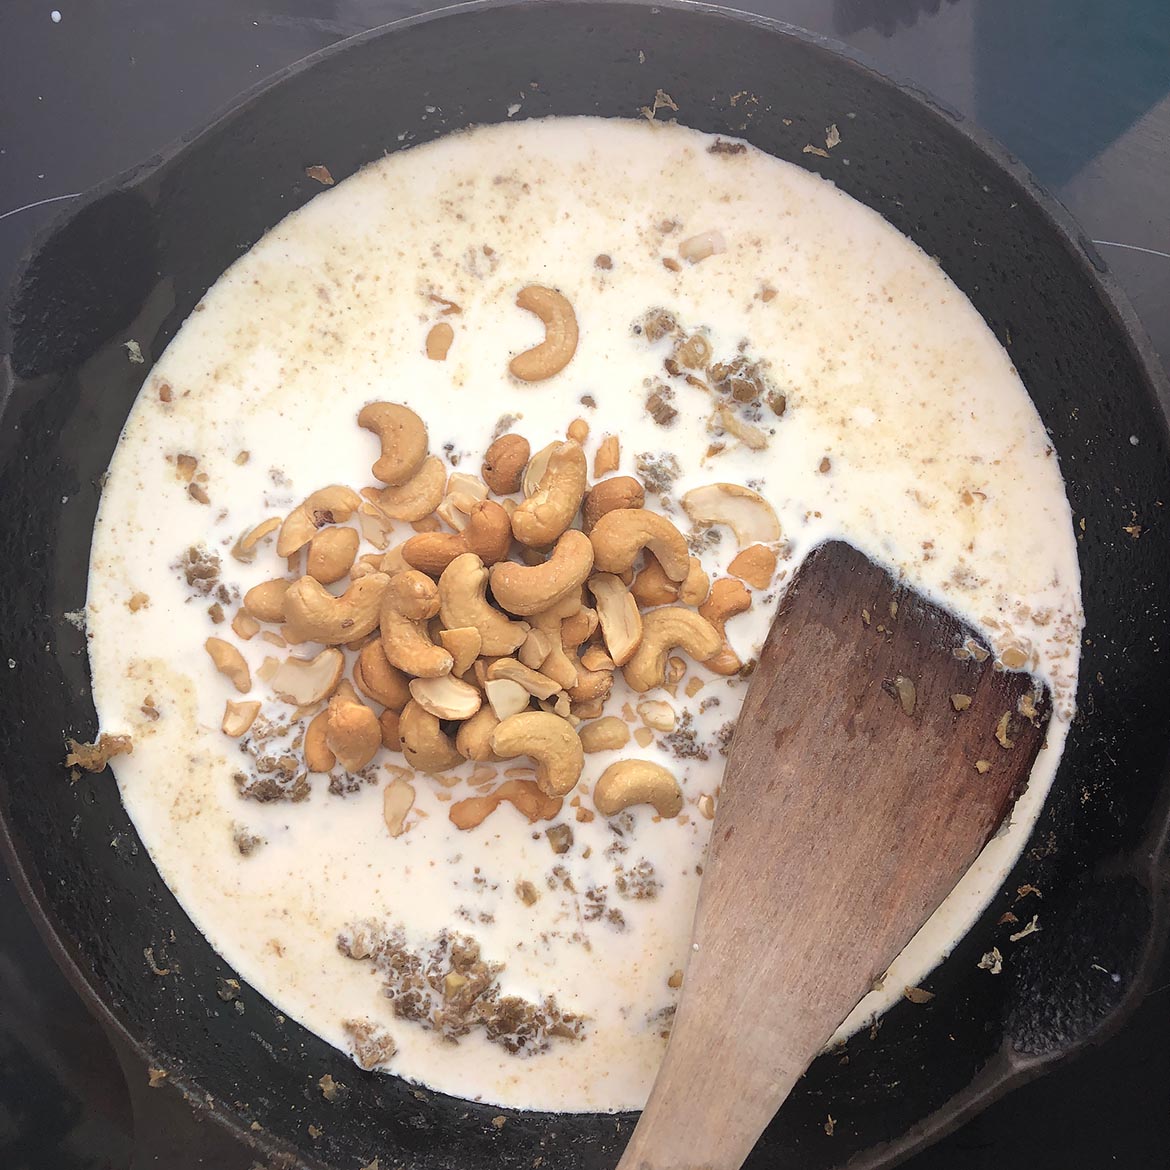 Top-down view of coconut milk and cashews added to the fried onions and spice mixture. Making Indian-Inspired Cashew Sauce. 